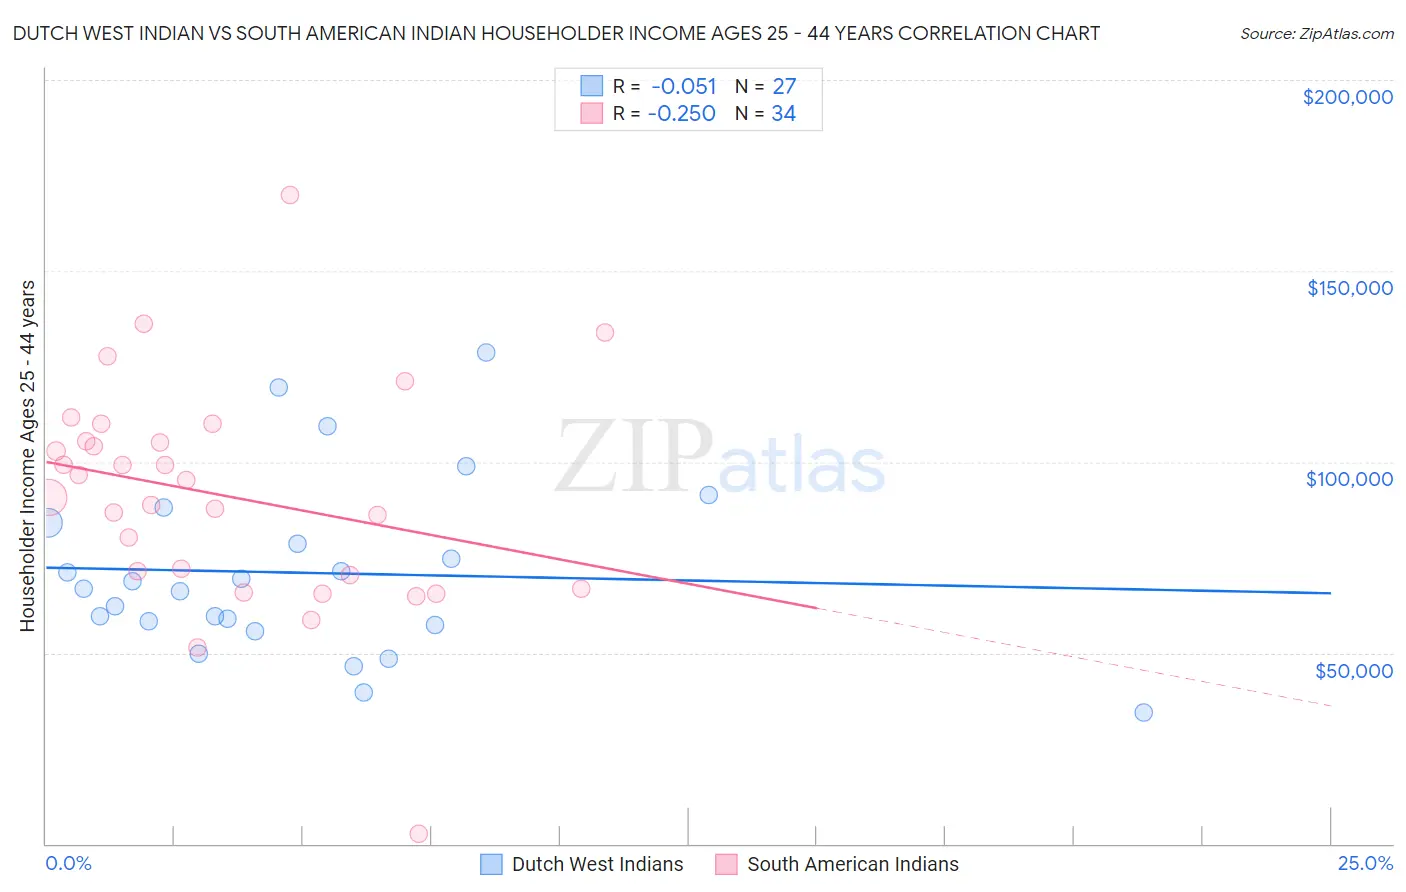 Dutch West Indian vs South American Indian Householder Income Ages 25 - 44 years